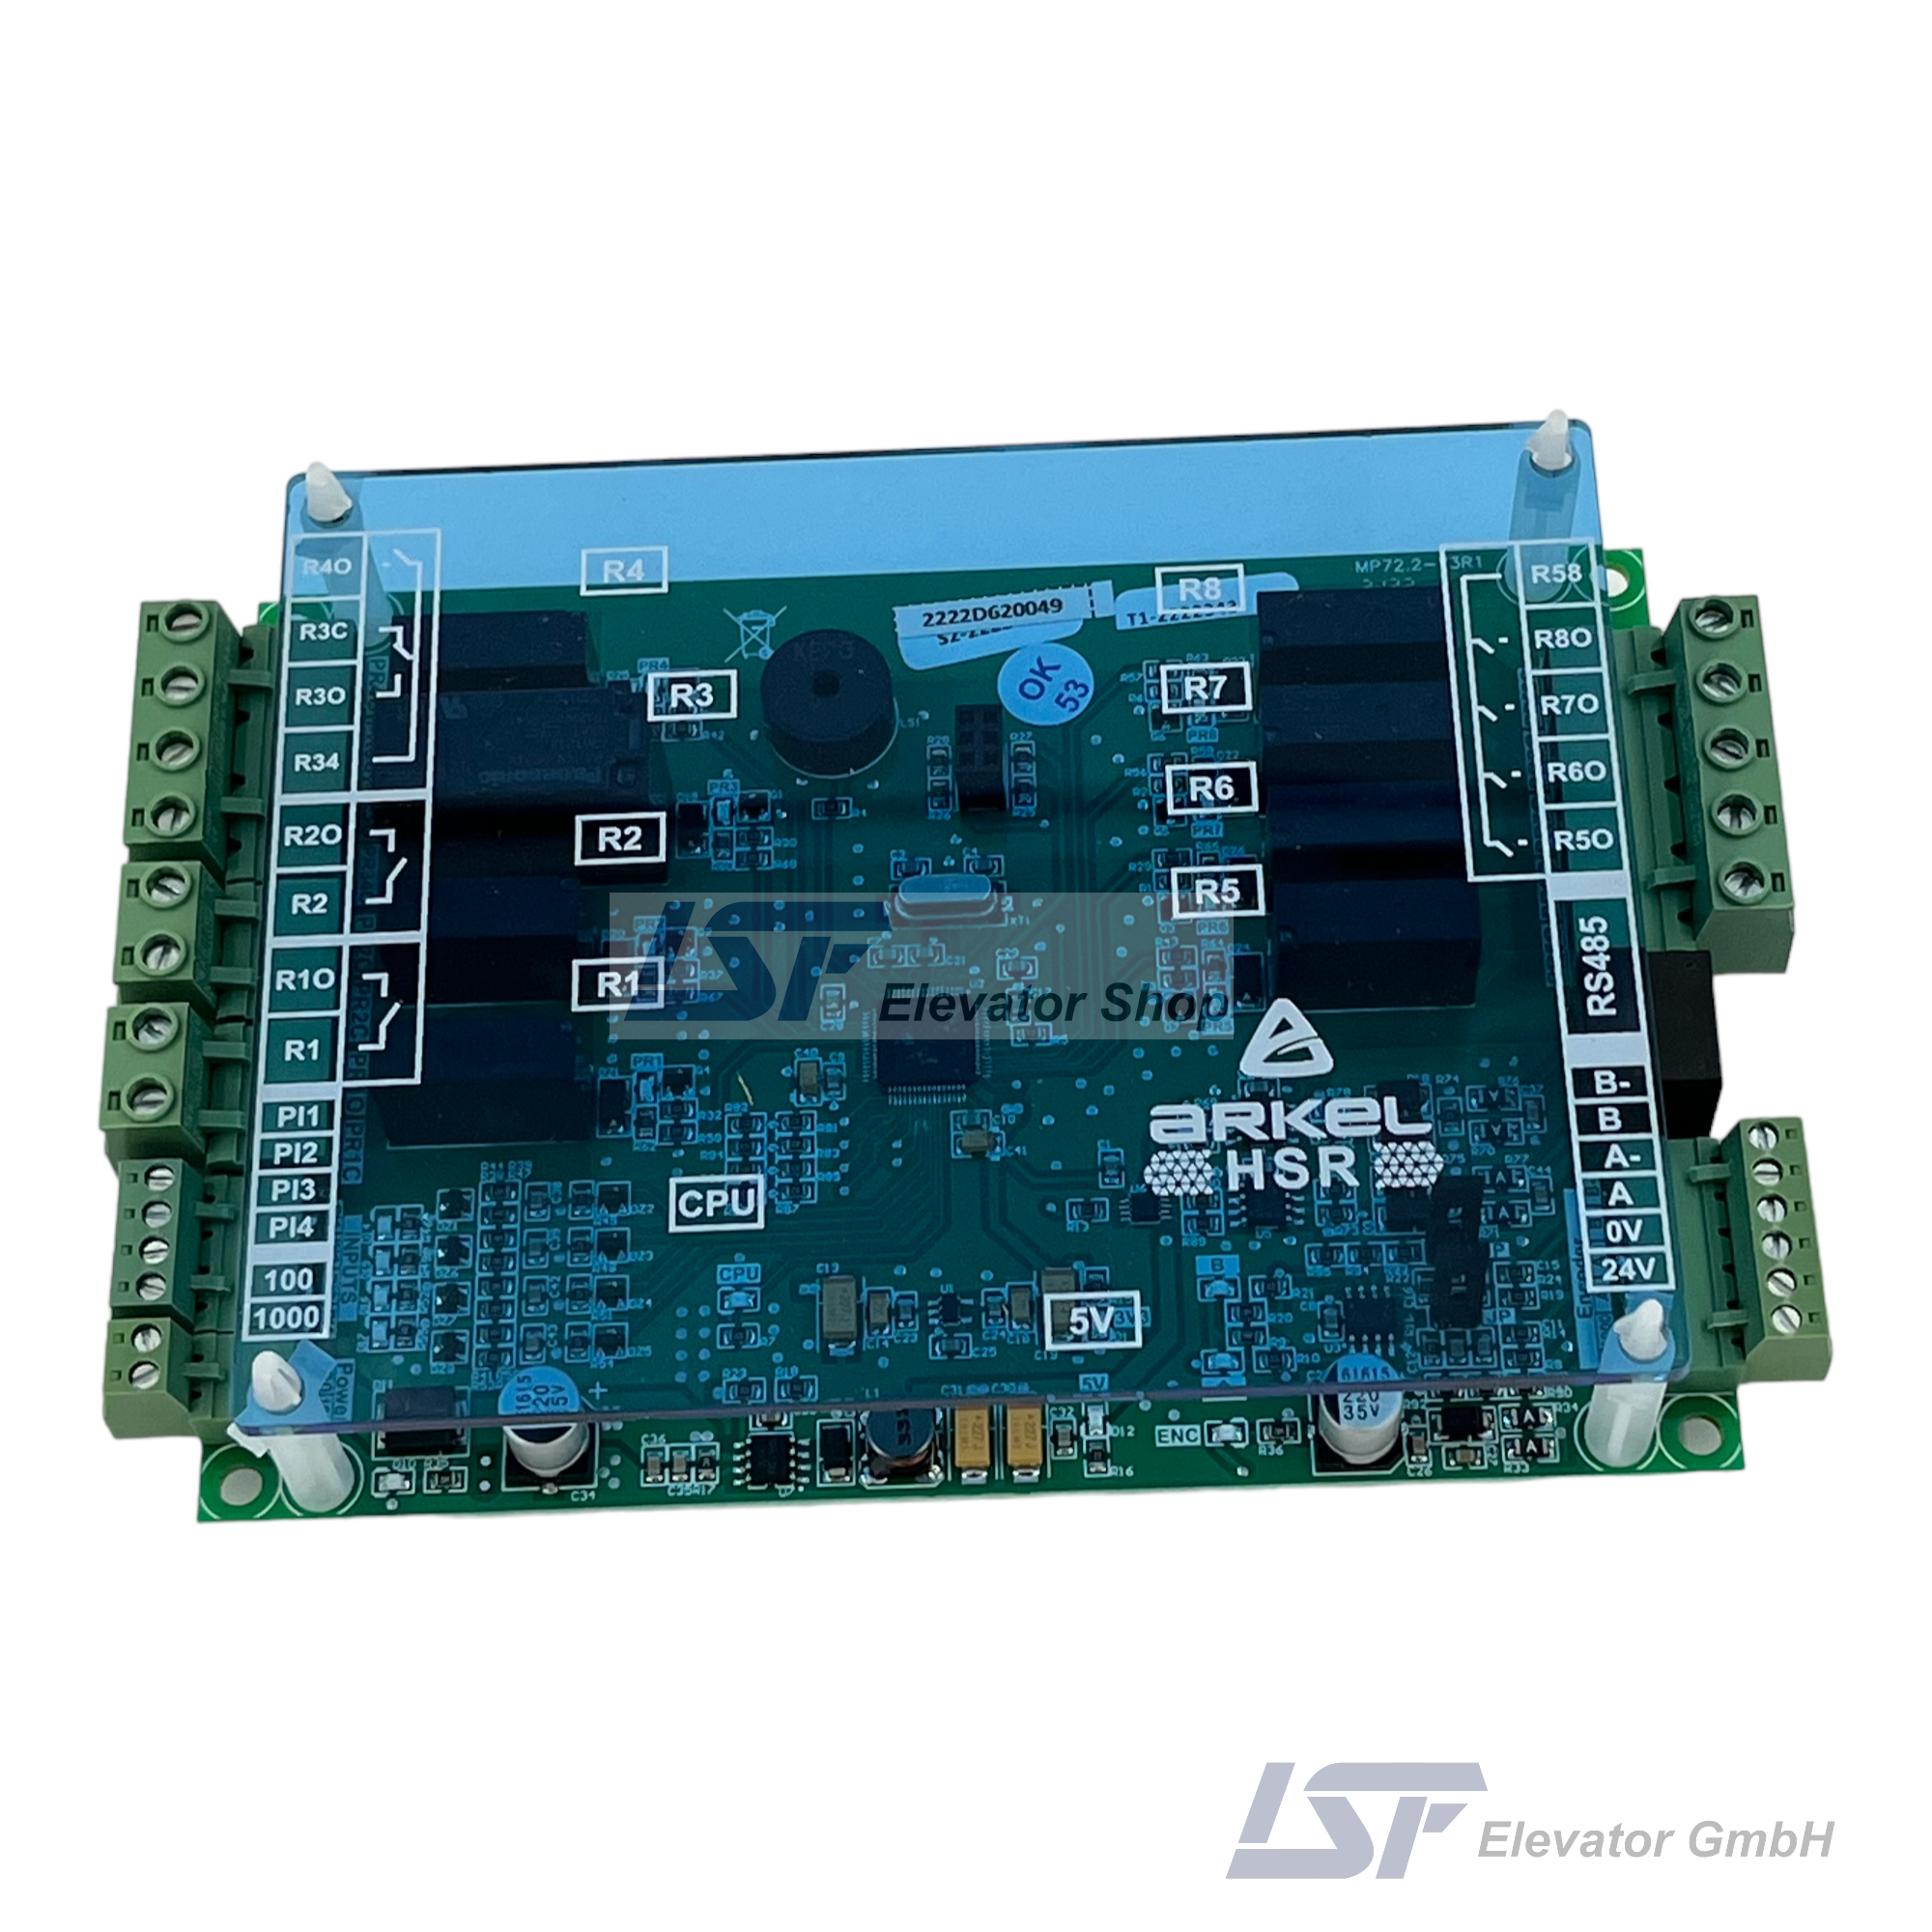 HSR Arkel Connection Board For Hydraulics and VVVF (ARL-700) (Front)